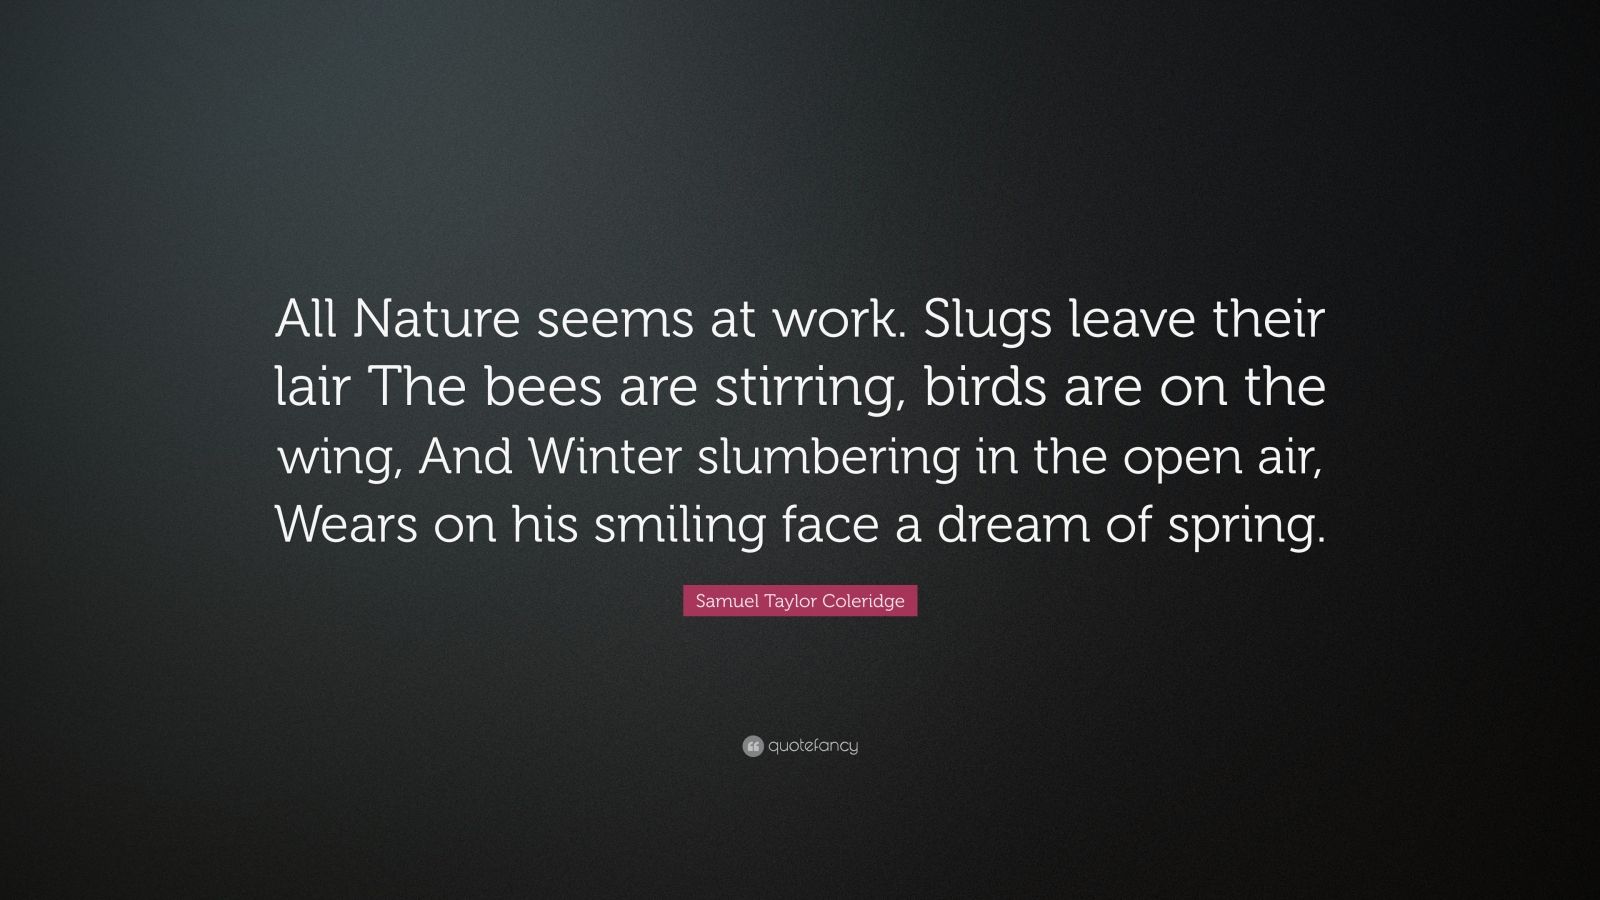 Samuel Taylor Coleridge Quote: “All Nature seems at work. Slugs leave their lair The ...